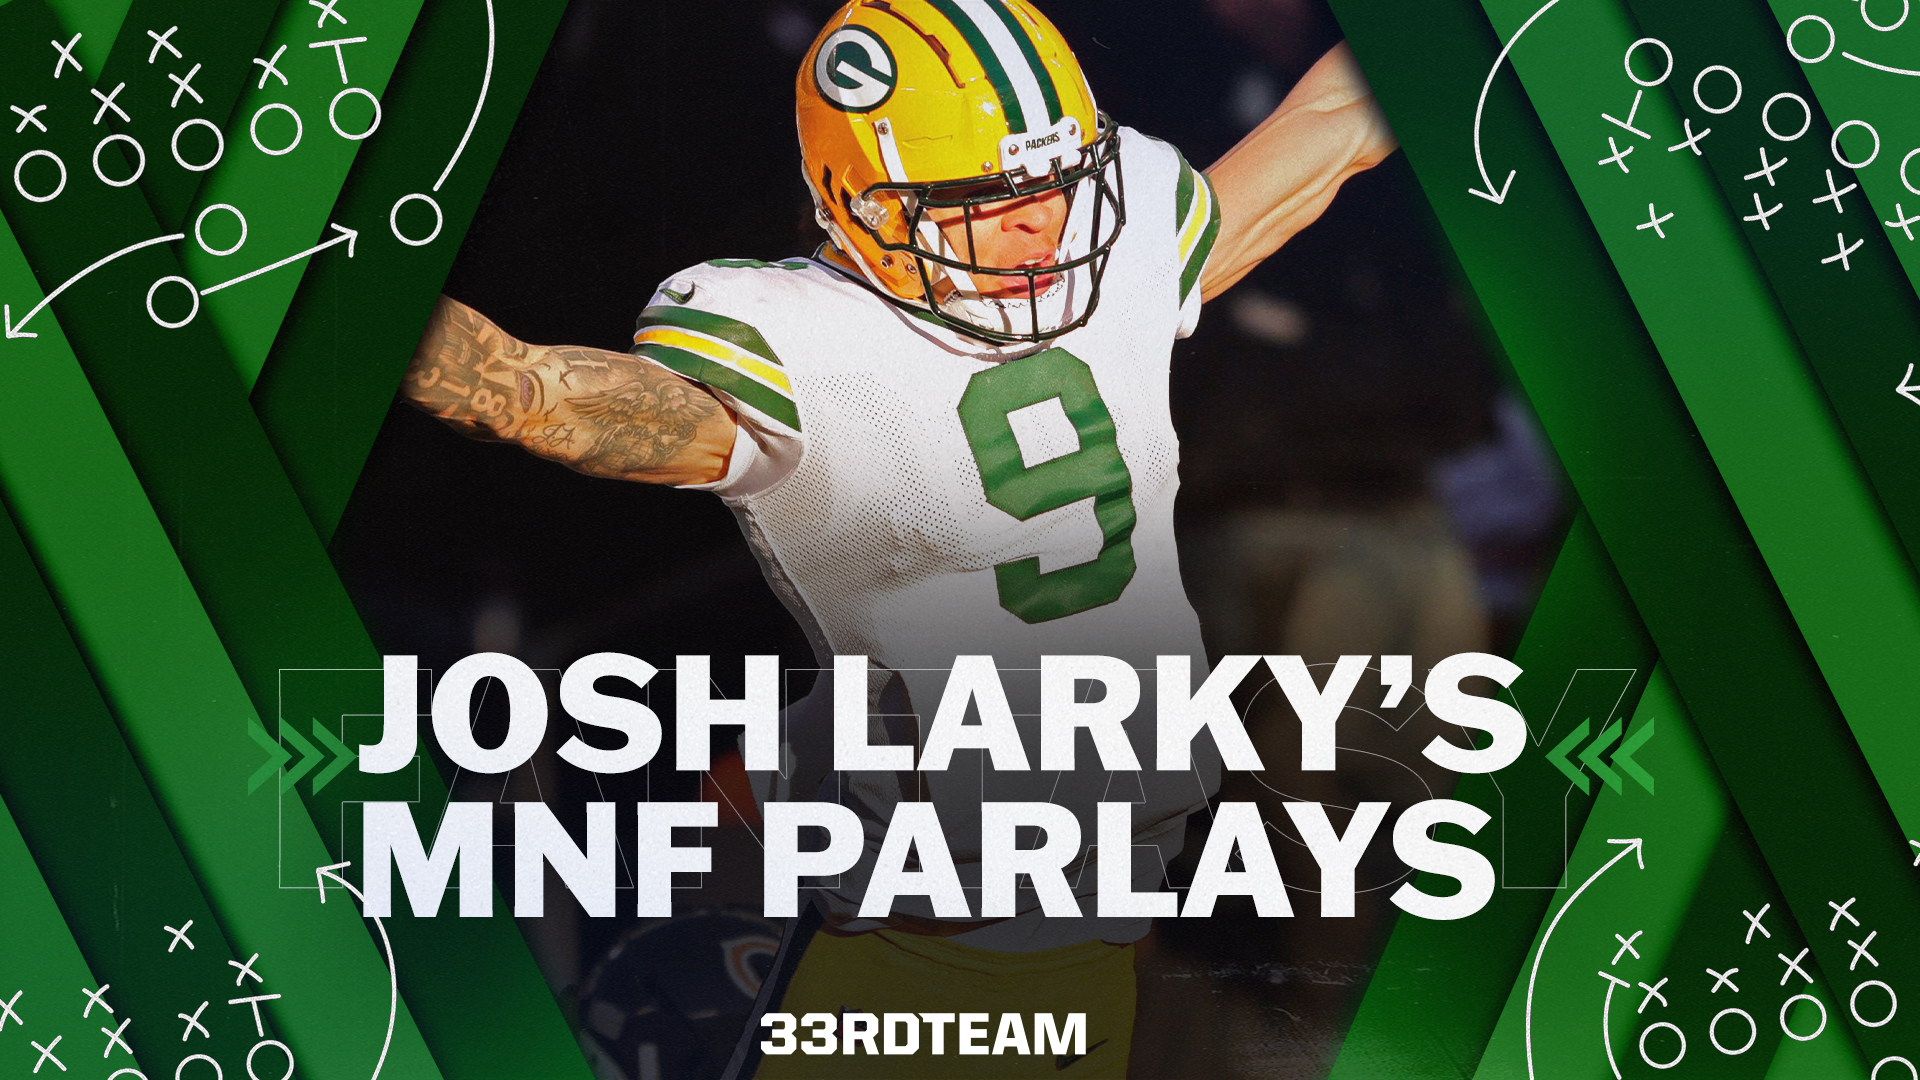 Larky’s Monday Night Football Parlays for Rams vs. Packers